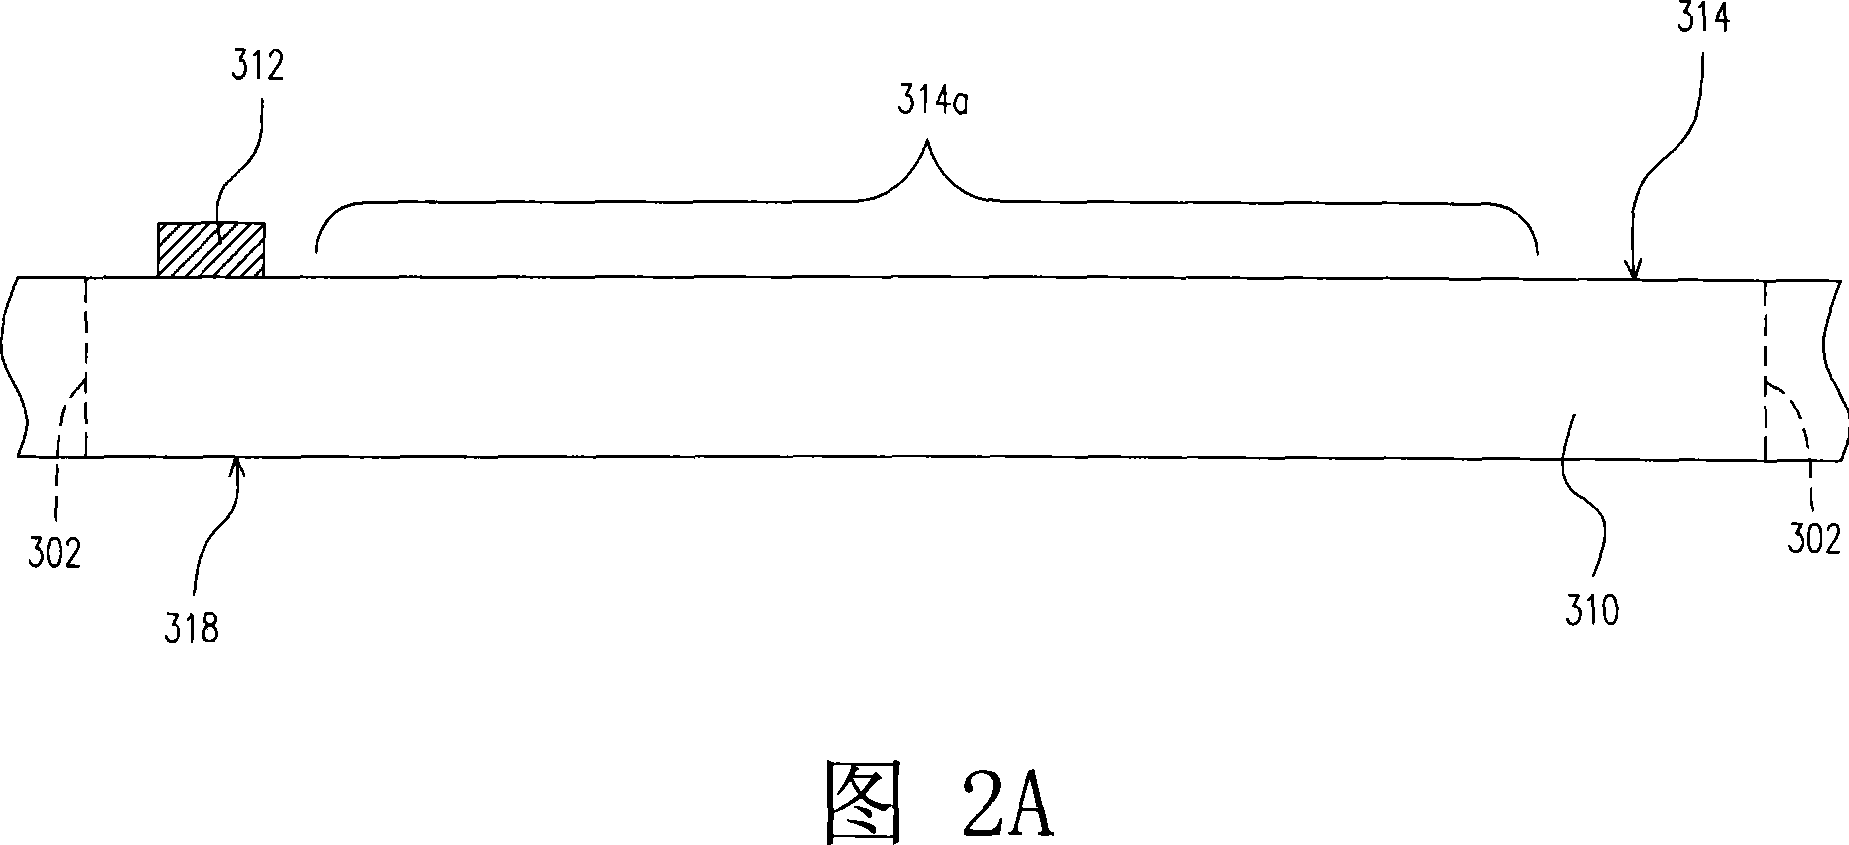 Chip overlap structure and wafer structure for manufacturing the chip stack structure